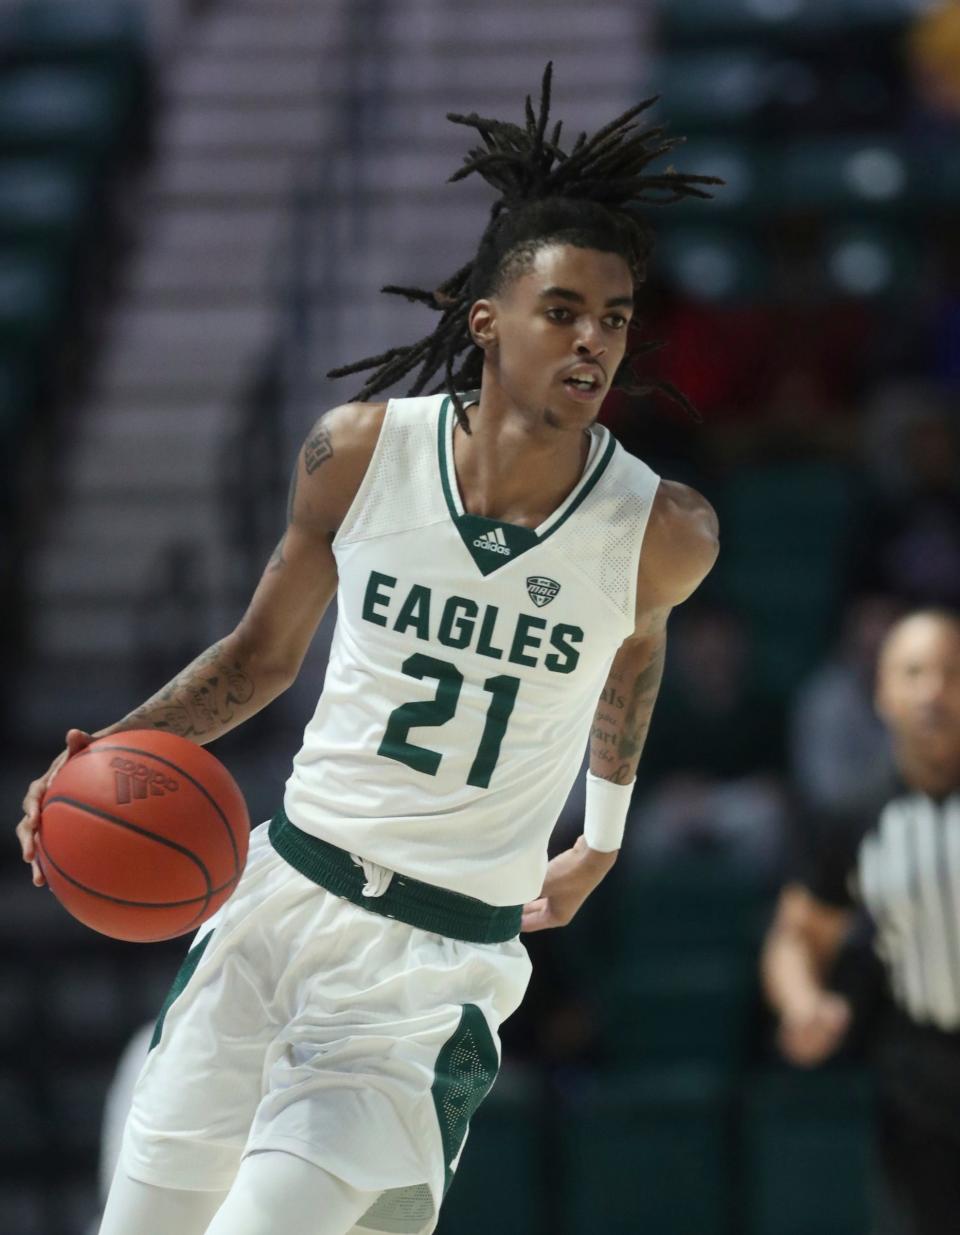 Eastern Michigan Eagles forward Emoni Bates brings the ball up court against the Ohio Bobcats during the first half Tuesday, Jan. 31, 2023 in Ypsilanti.